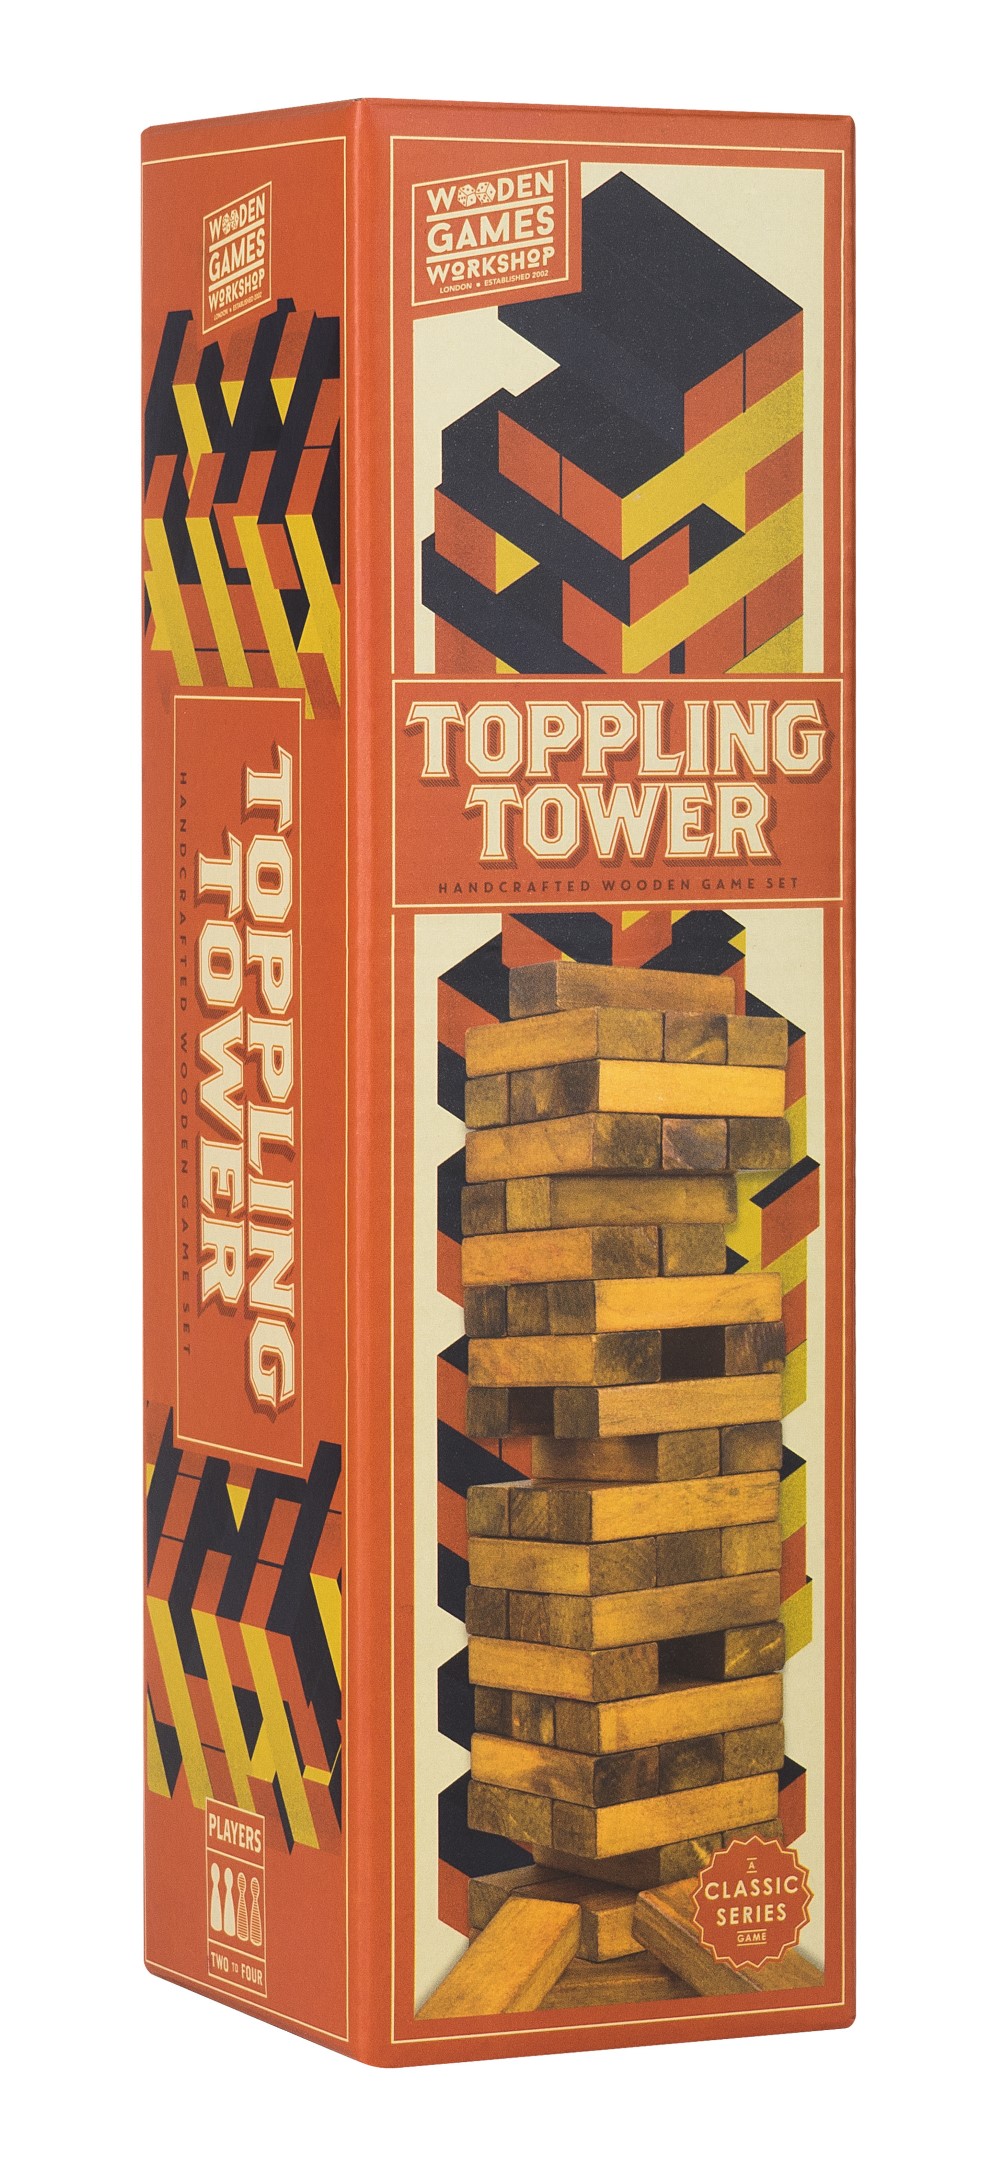 Professor Puzzle Wooden Games Workshop Collection Toppling Tower